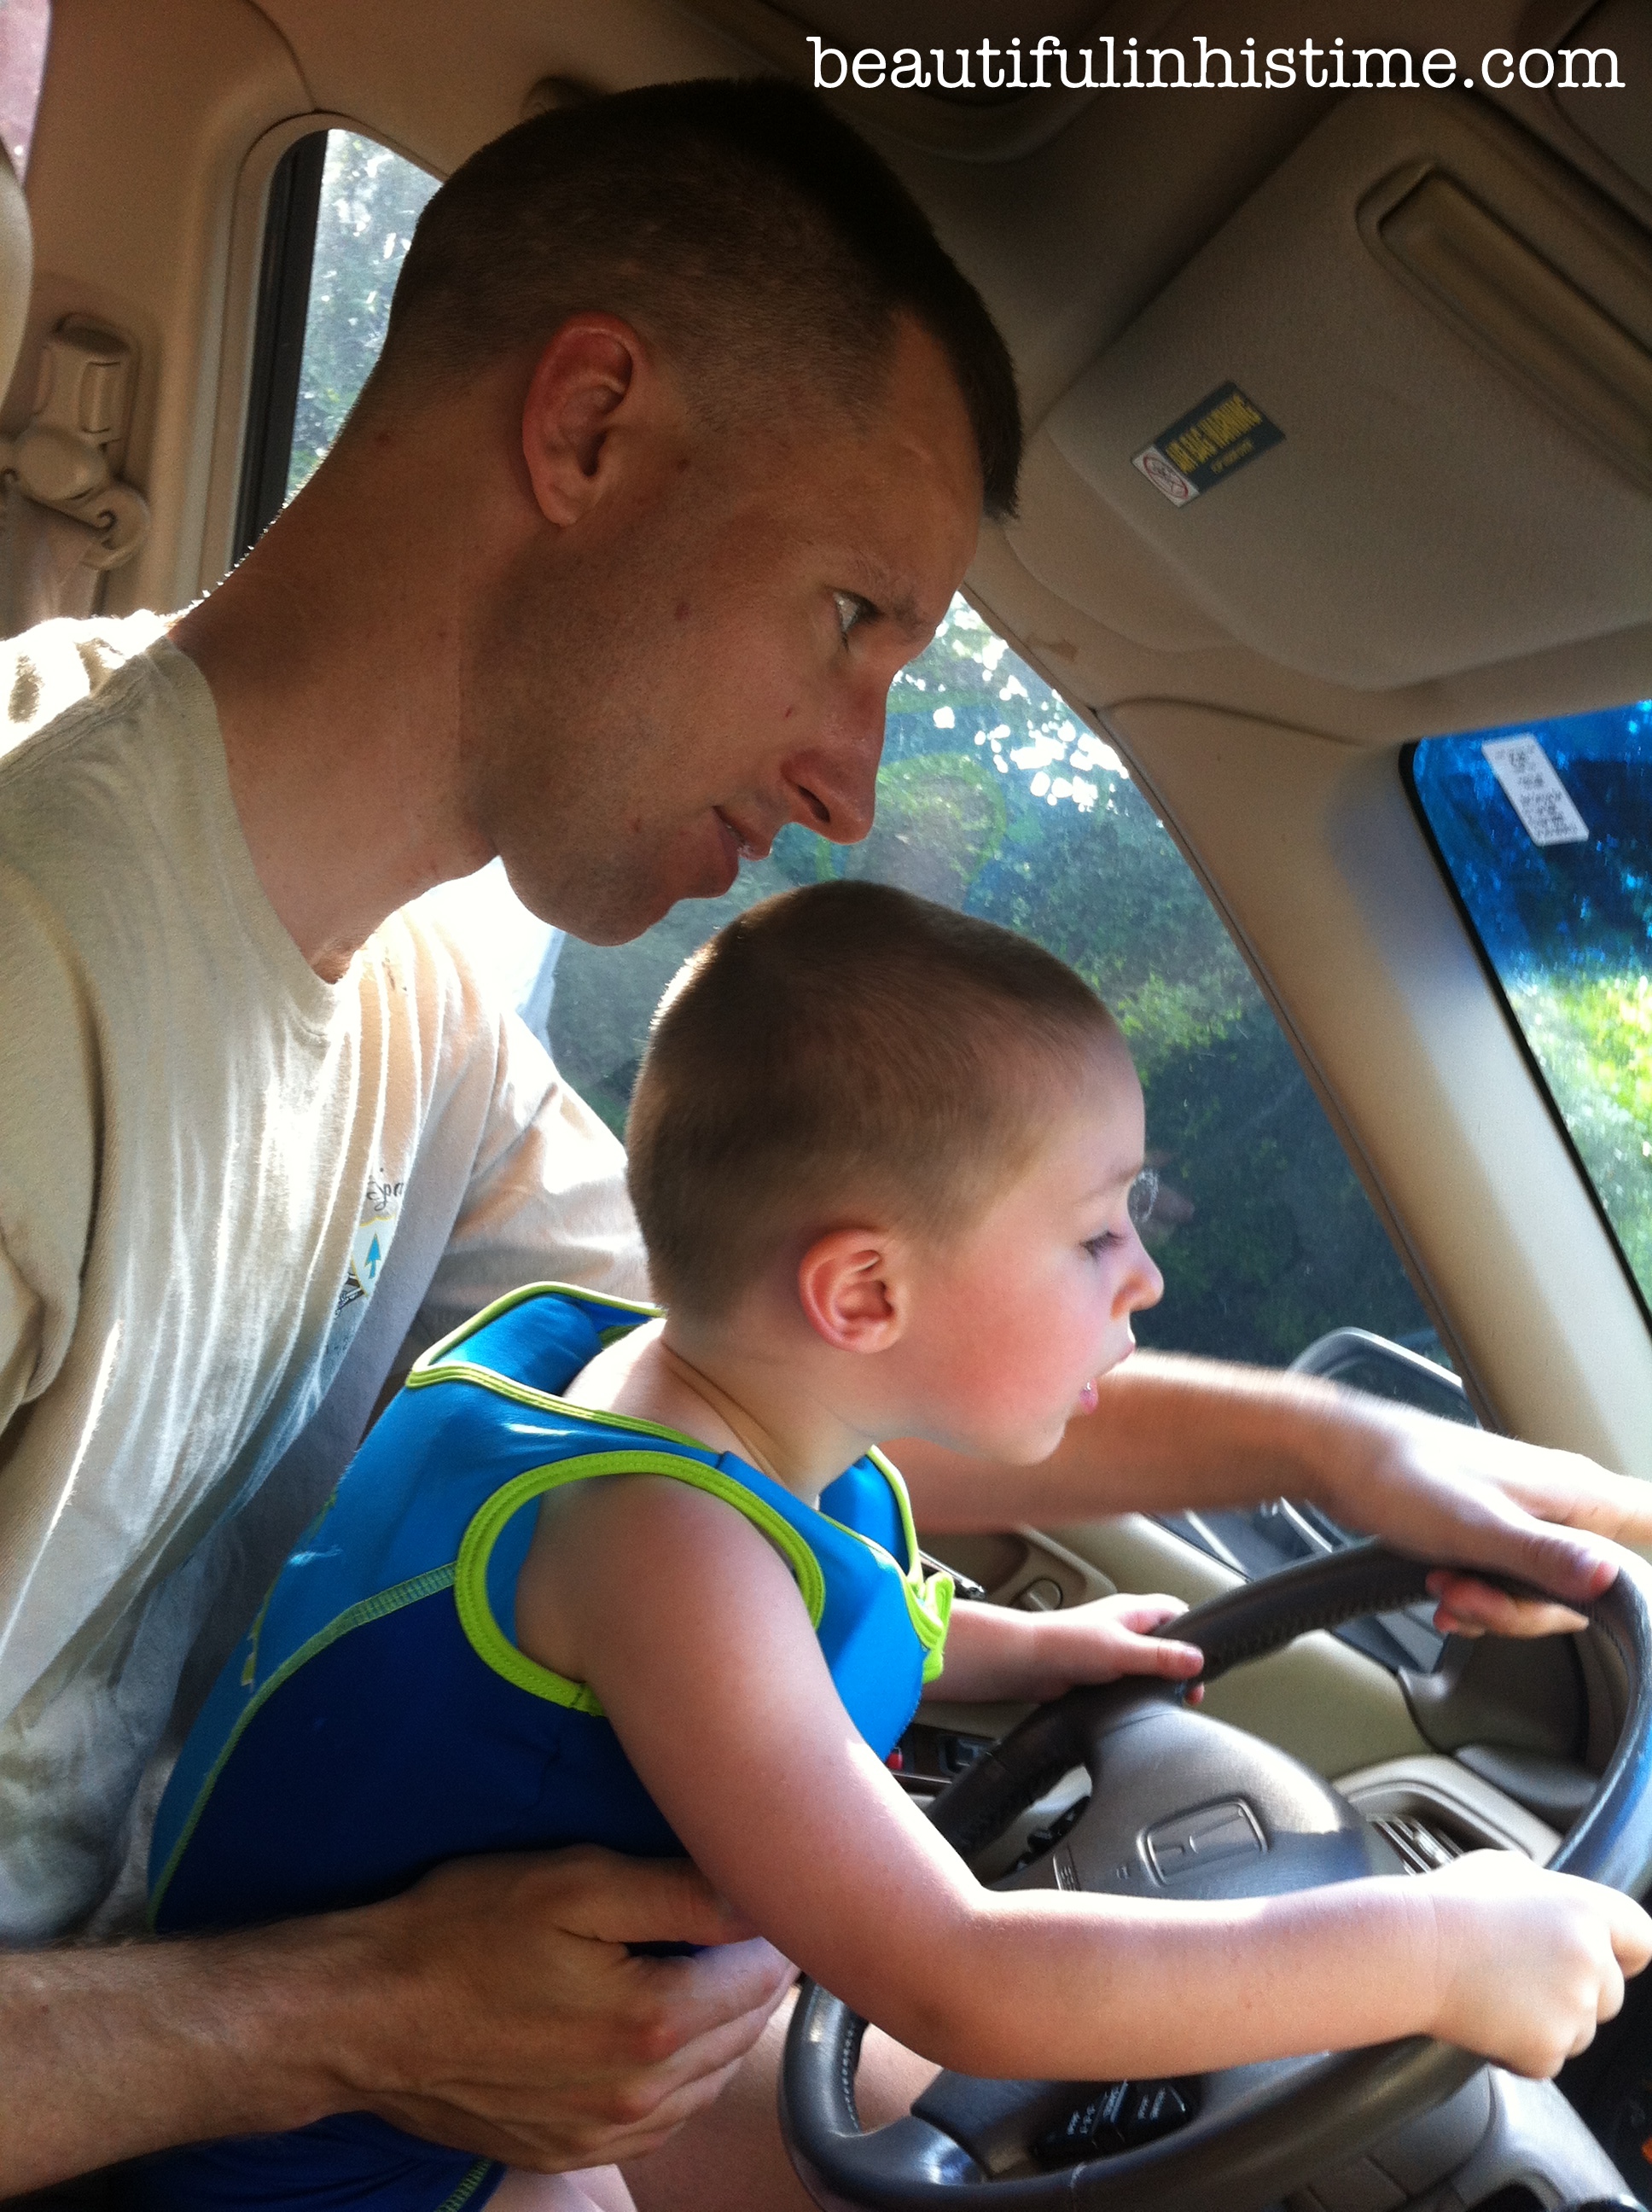 Driving with Daddy Beauty in the Mess Edition 07.09.13 @beautifulinhistime.com